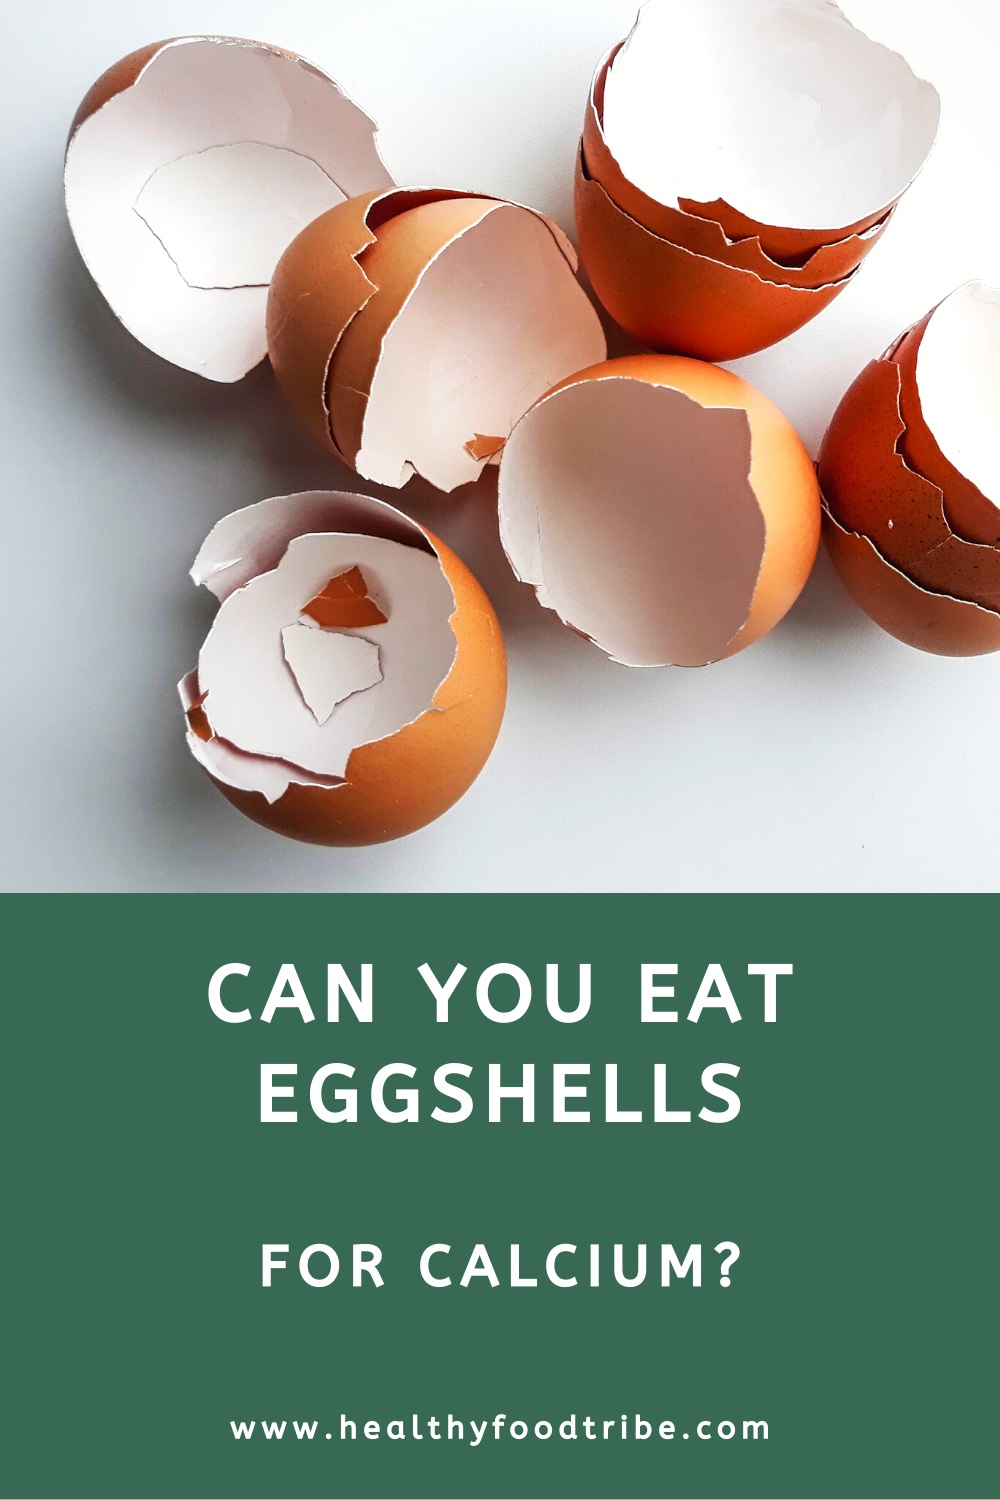 Can you eat egg shells for calcium?